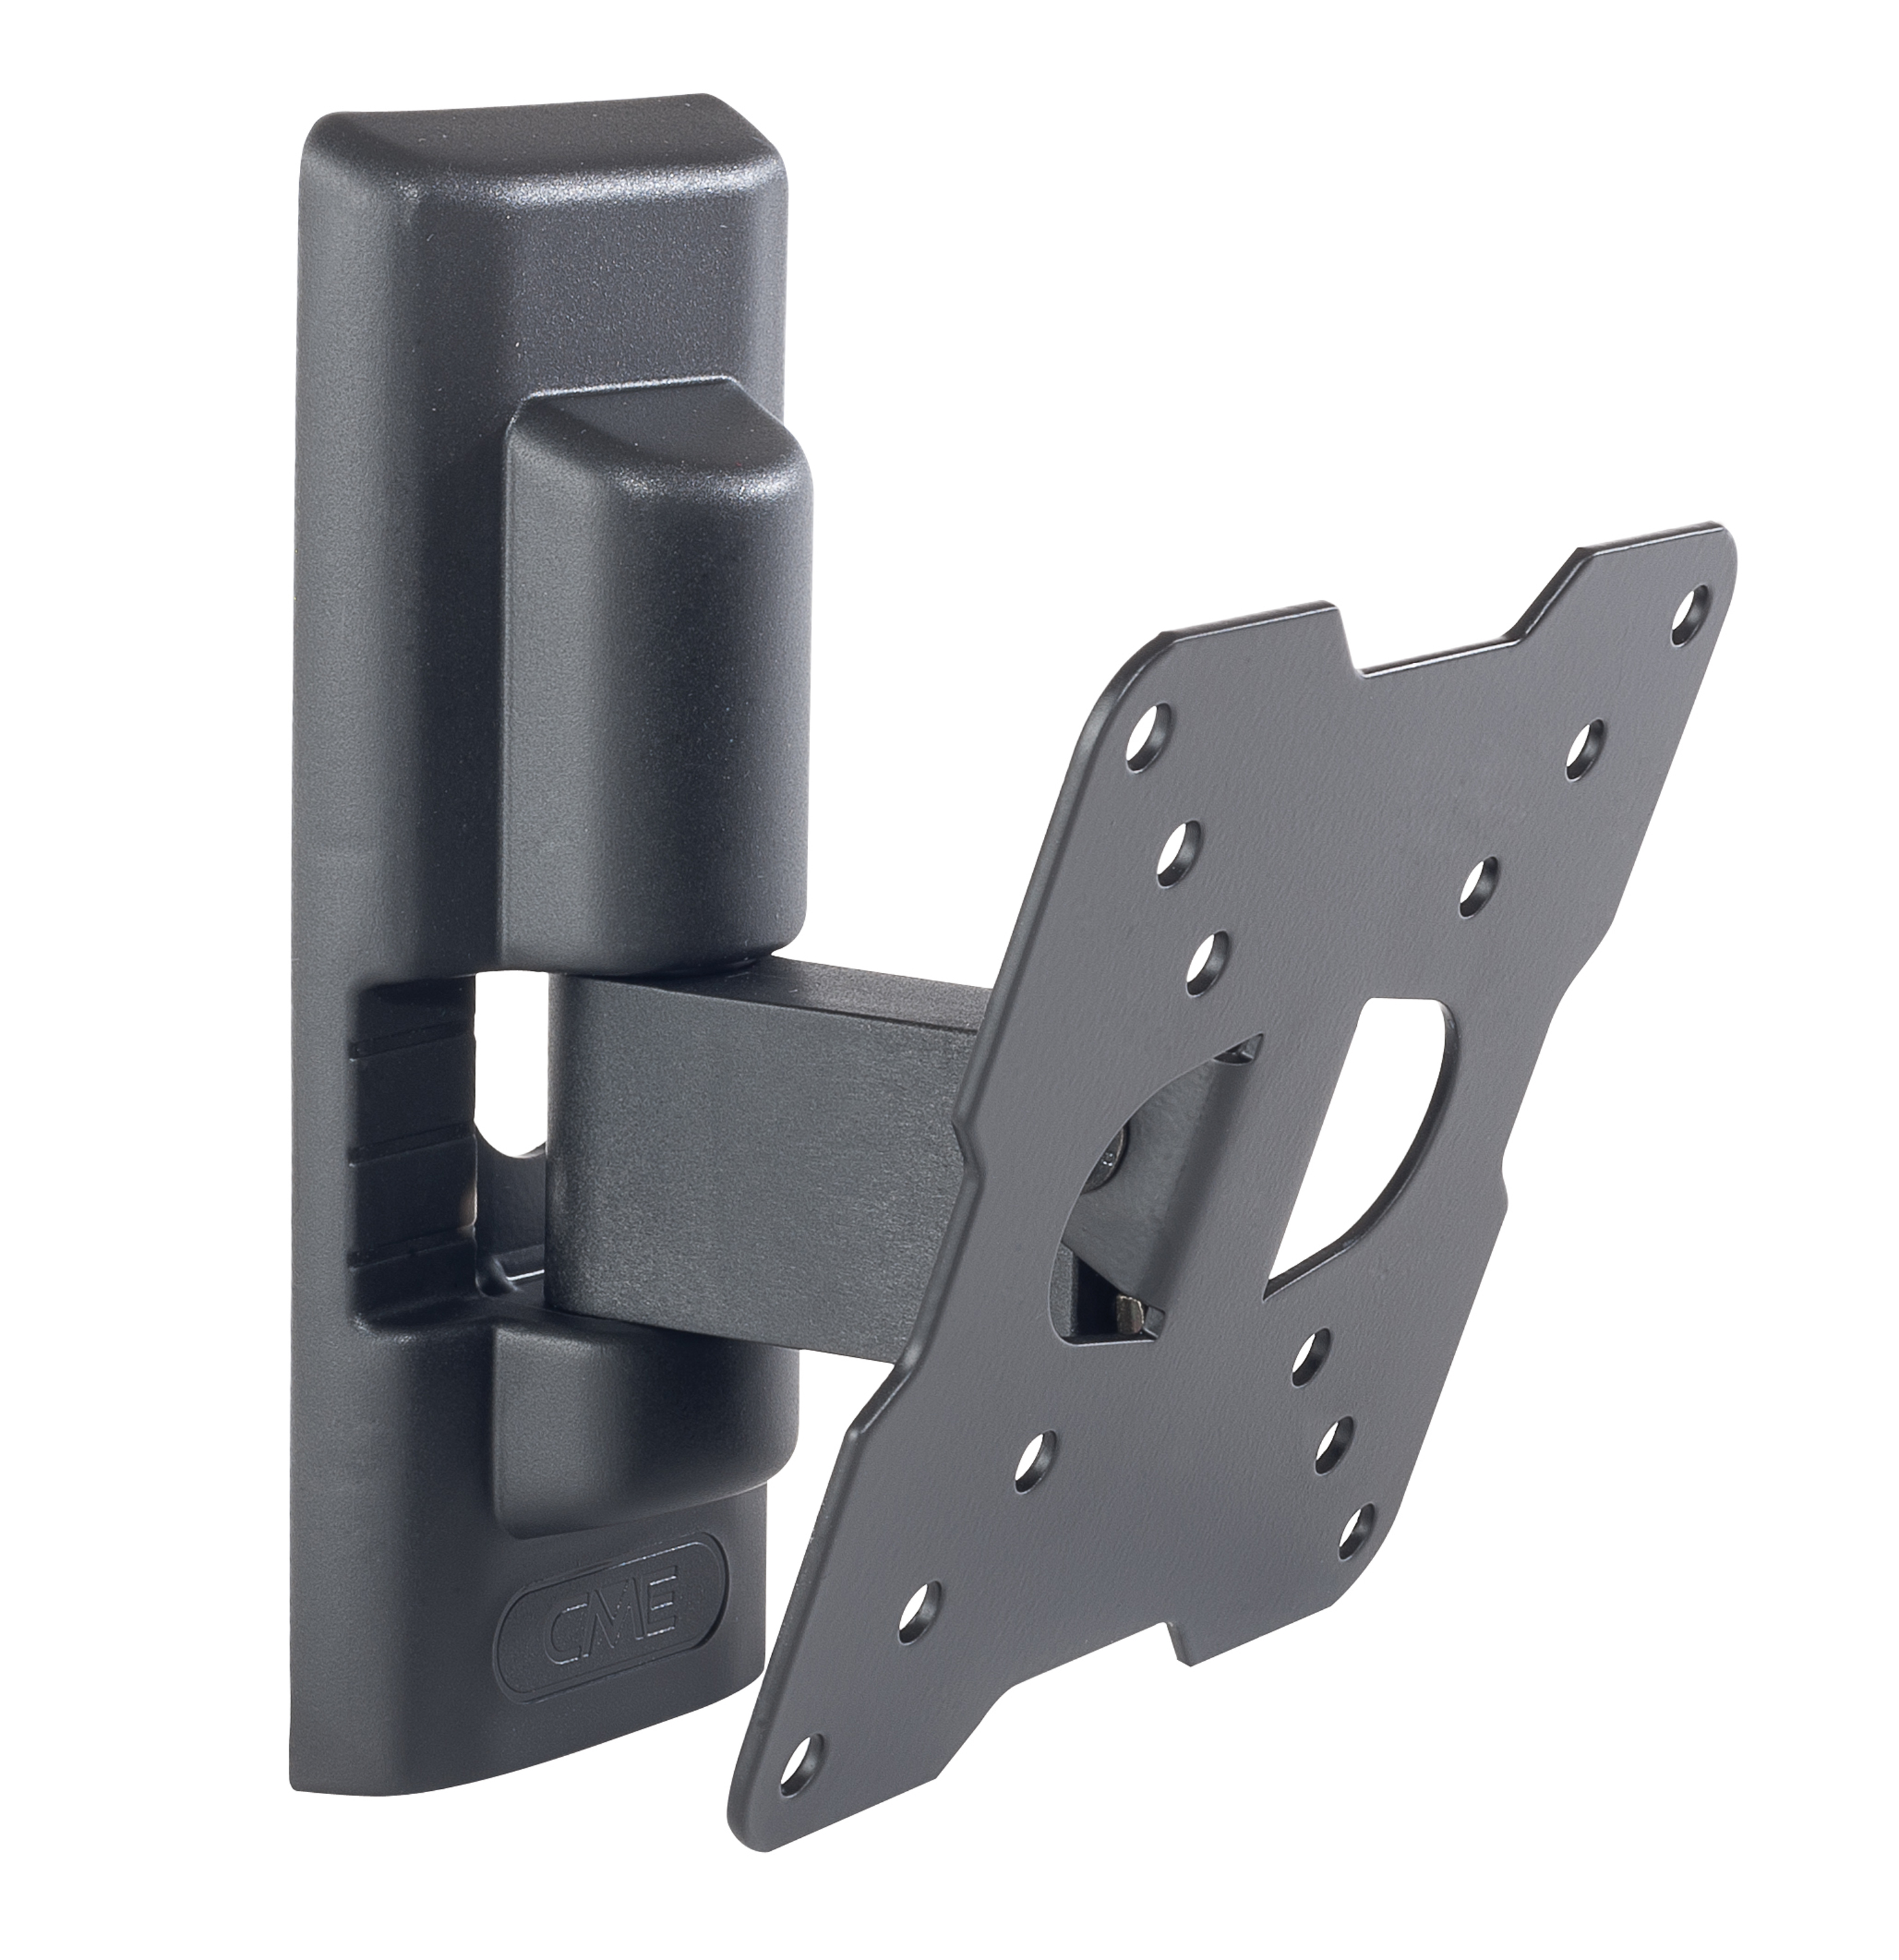 Cme ETR 100, wall bracket rotatable with arm for 14-25 inch tv, black